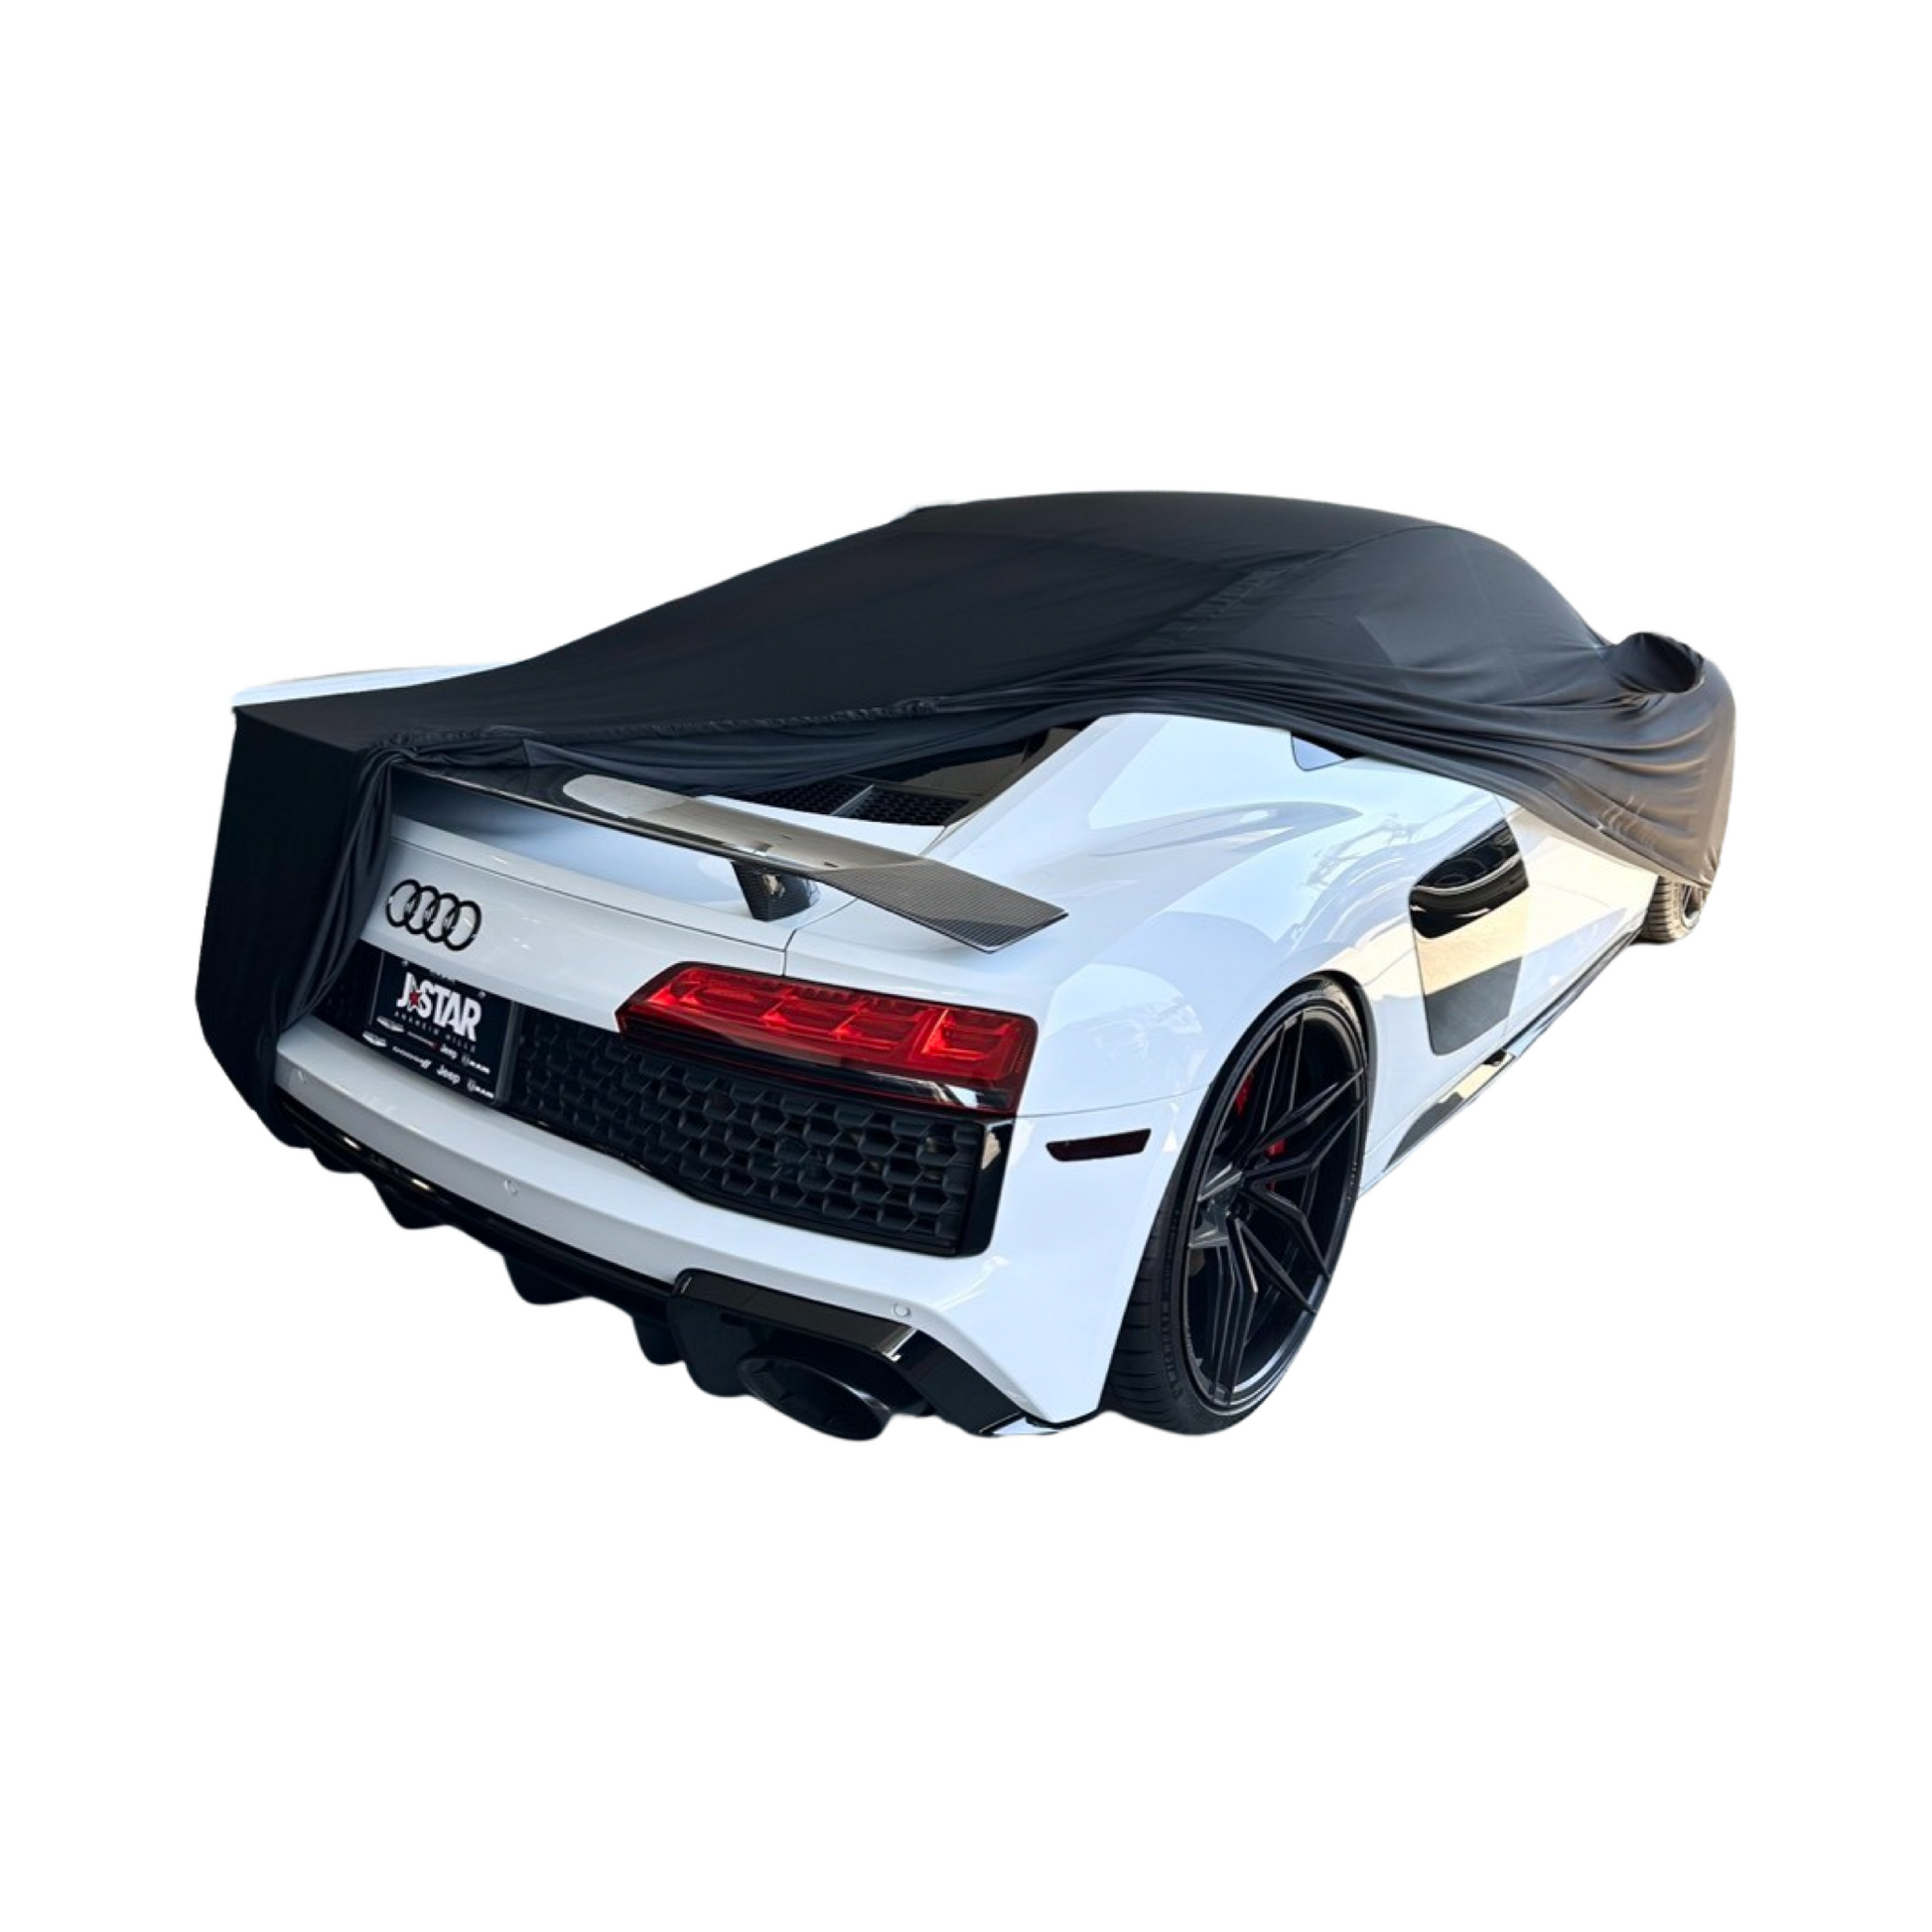 Audi R8 GTCoupe Car Covers - Outdoor, Guaranteed Fit, Water